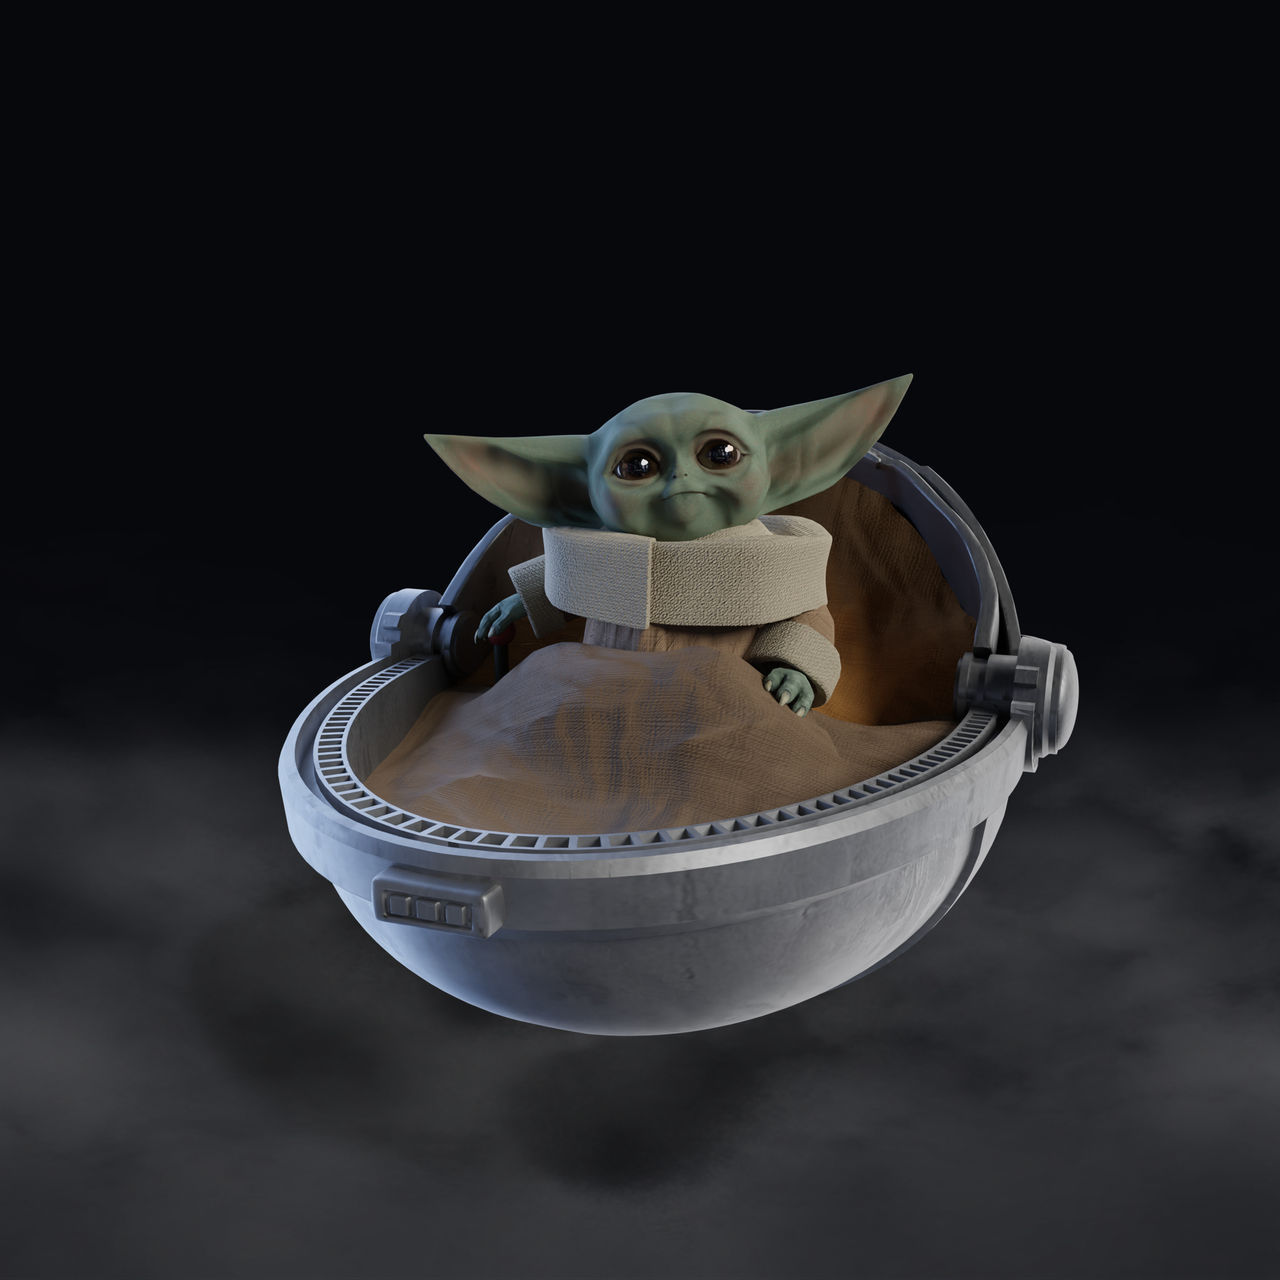 Baby Yoda binds to the template Star Wars Battlefront 2 through a mod